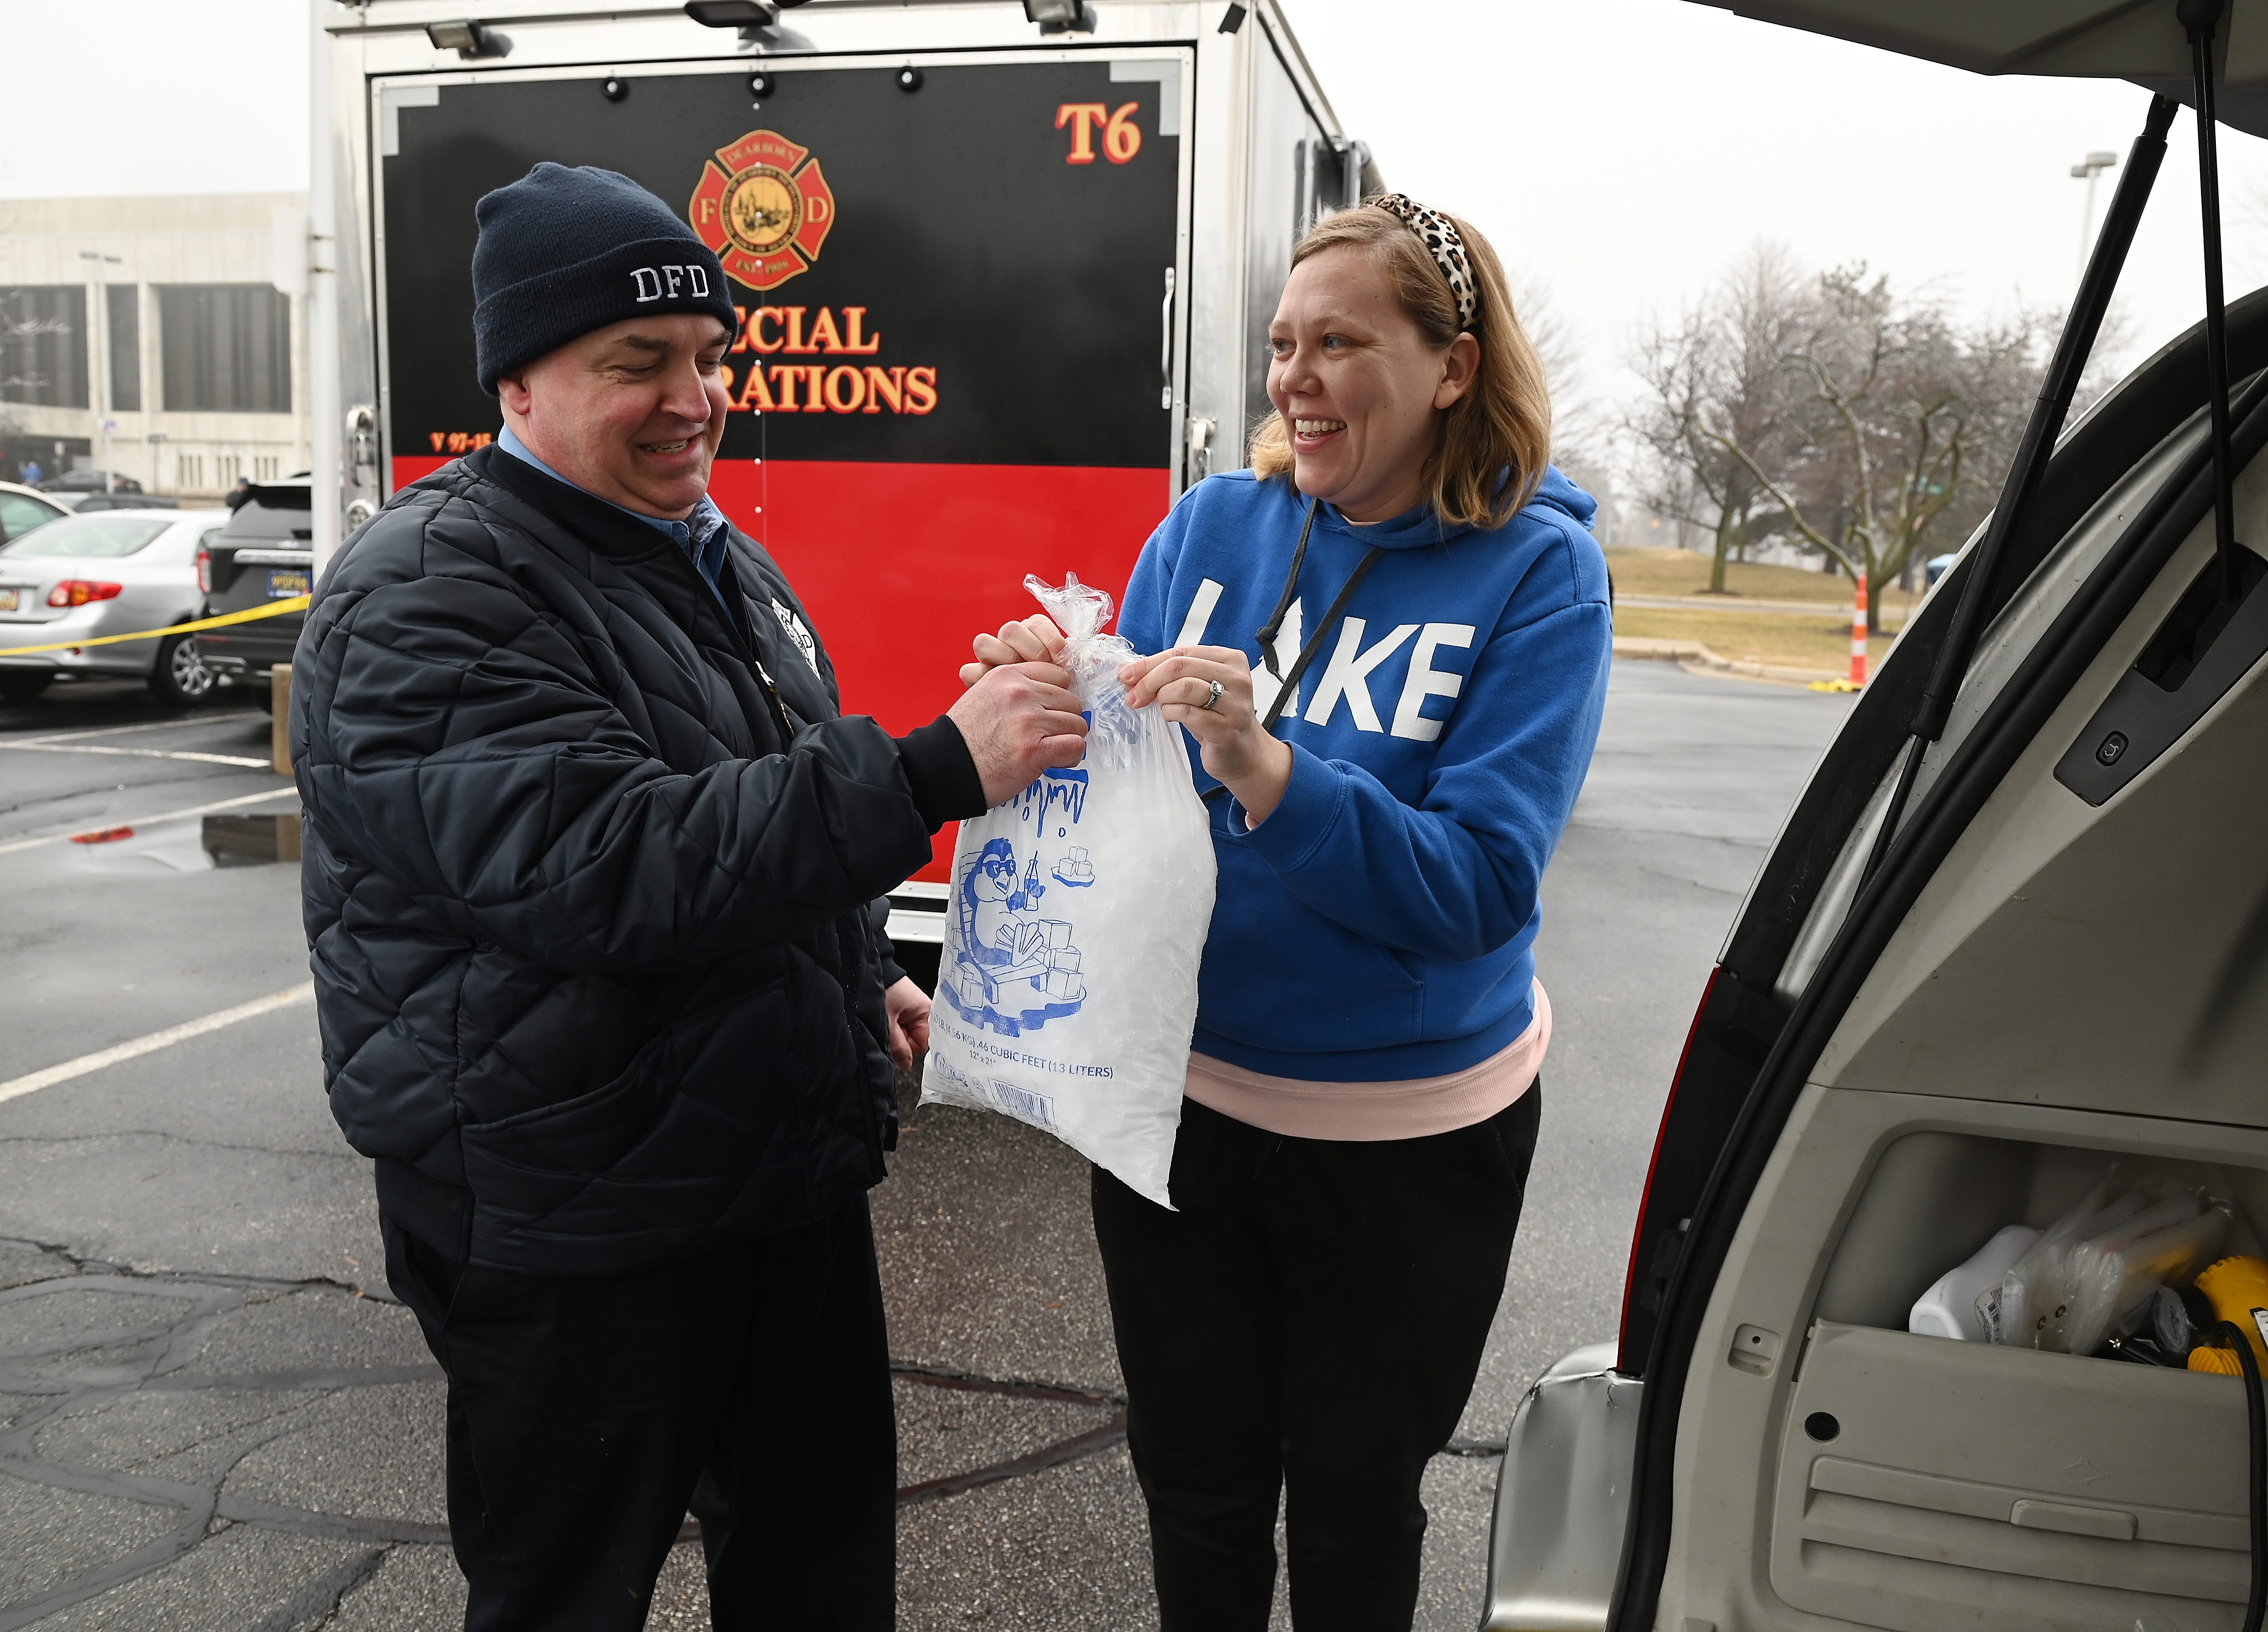 Emily Brady, 35, of Dearborn, is happy to receive two bags of dry ice from Jim Rodgers, Emergency Manager Coordinator for the City of Dearborn, during the free give away by the City of Dearborn to help residents affected by the ice storm. February 23, 2023, Dearborn, MI.